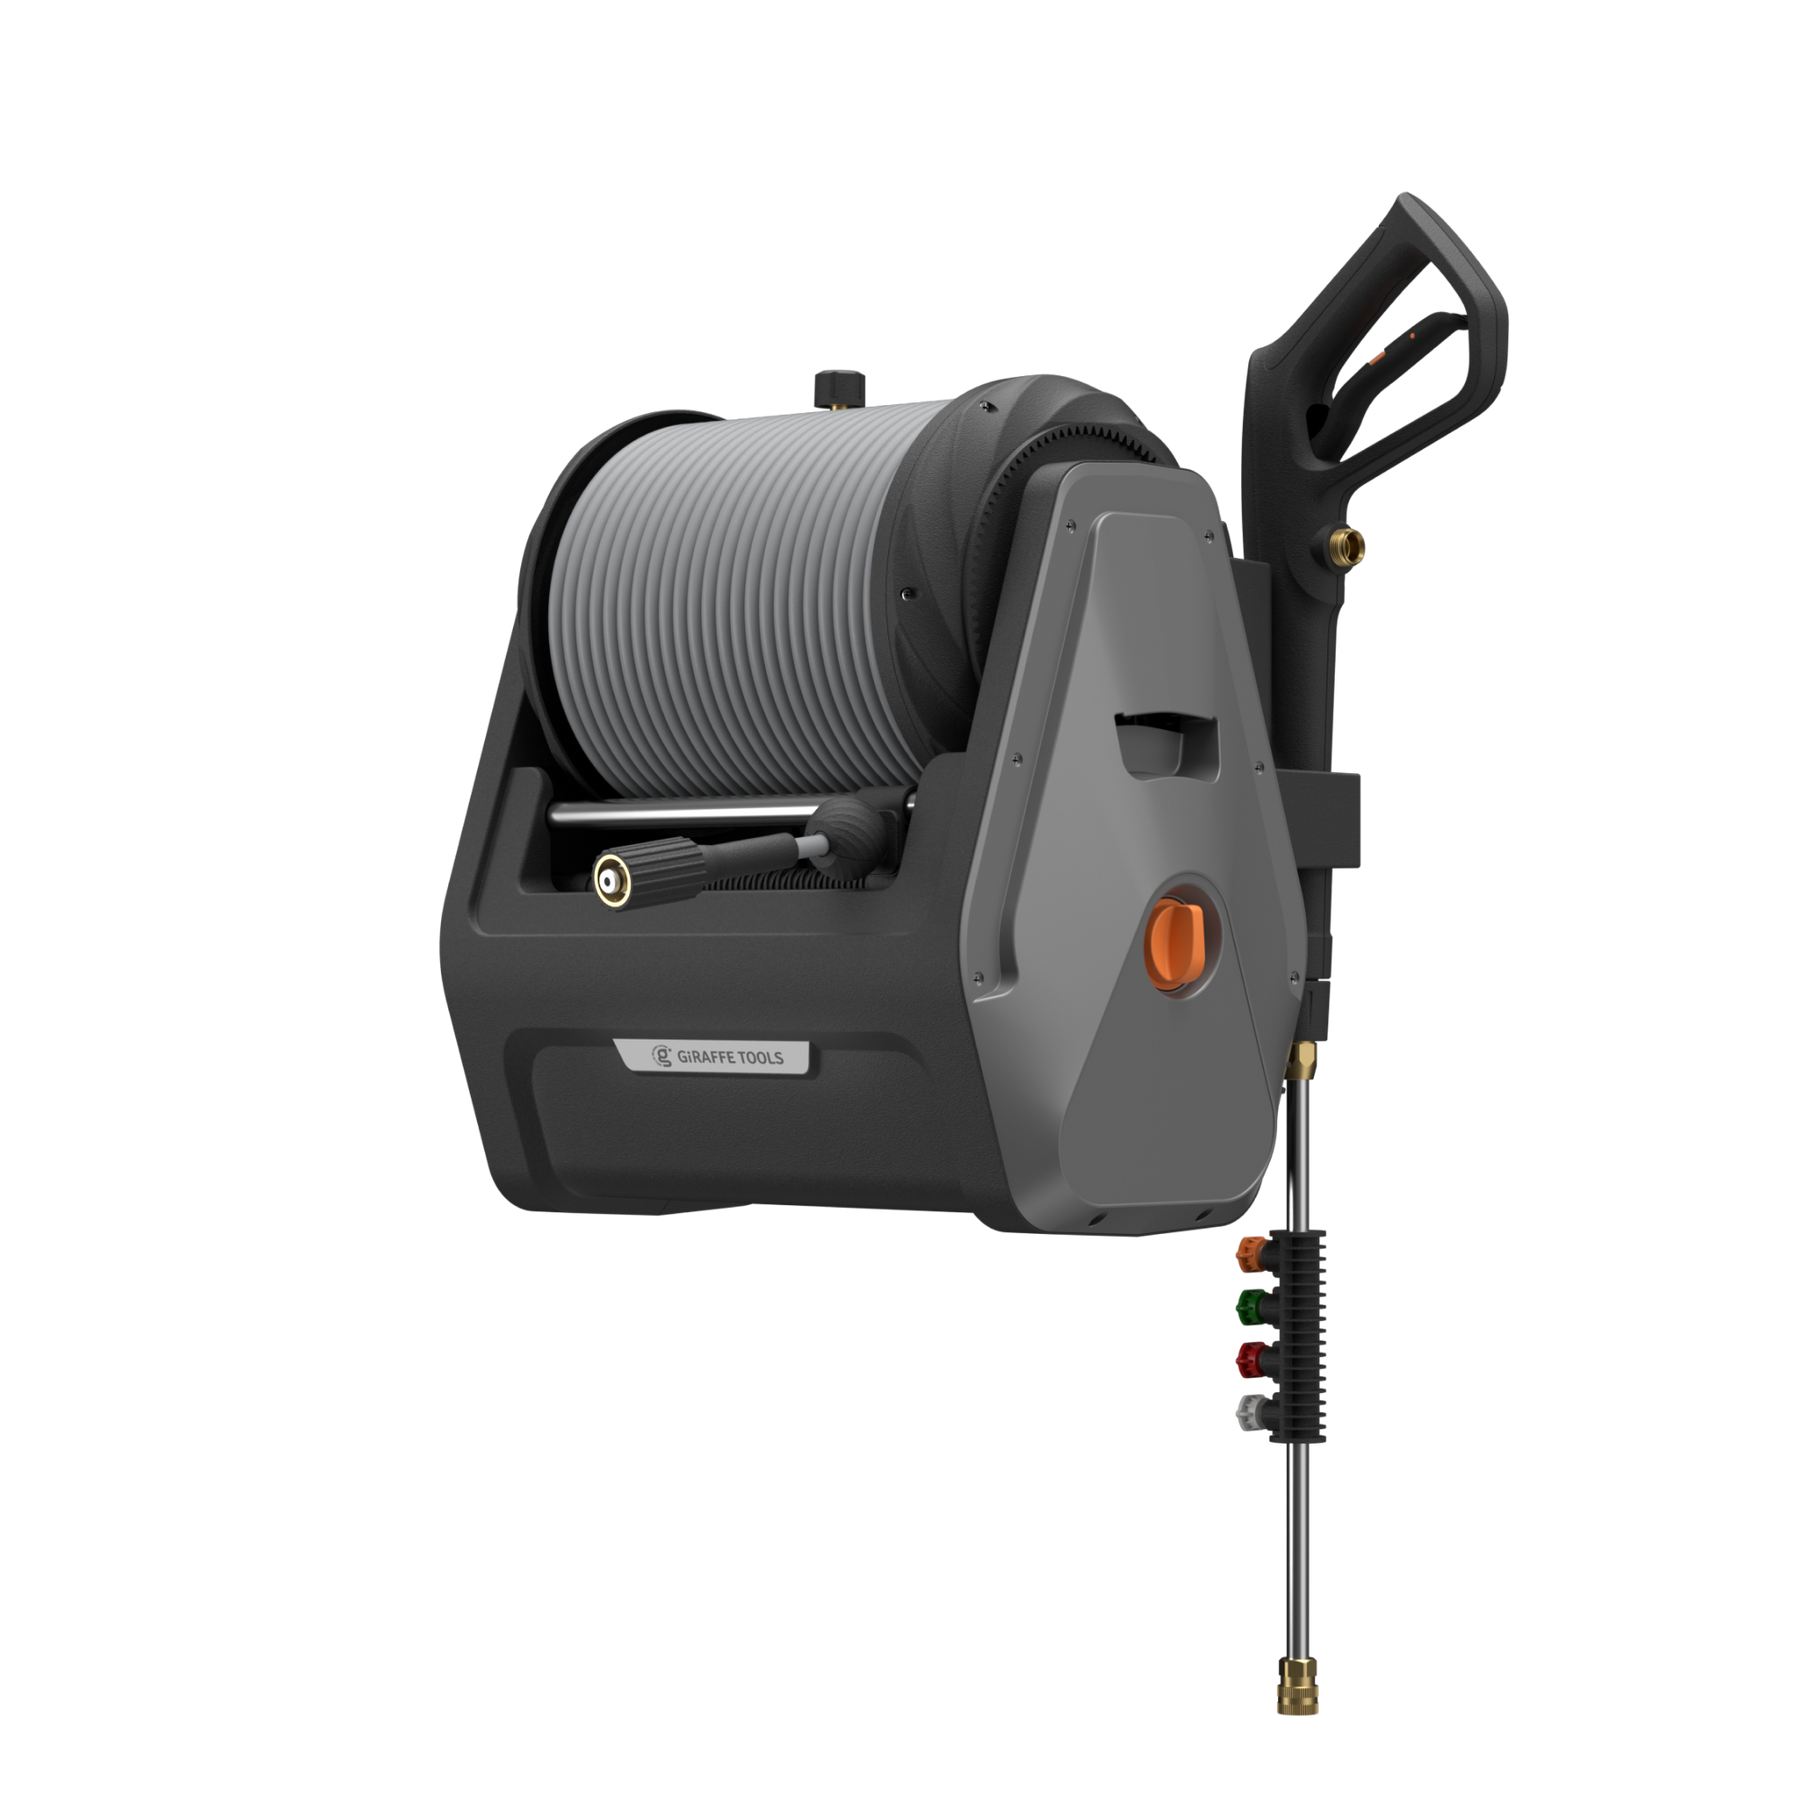 Giraffe Tools Grandfalls Pressure Washer Plus, Wall Mount Power Washer  Electric with 100FT Retractable Reel, 2200PSI, 2.4GPM, 4 Nozzles, Foam  Cannon